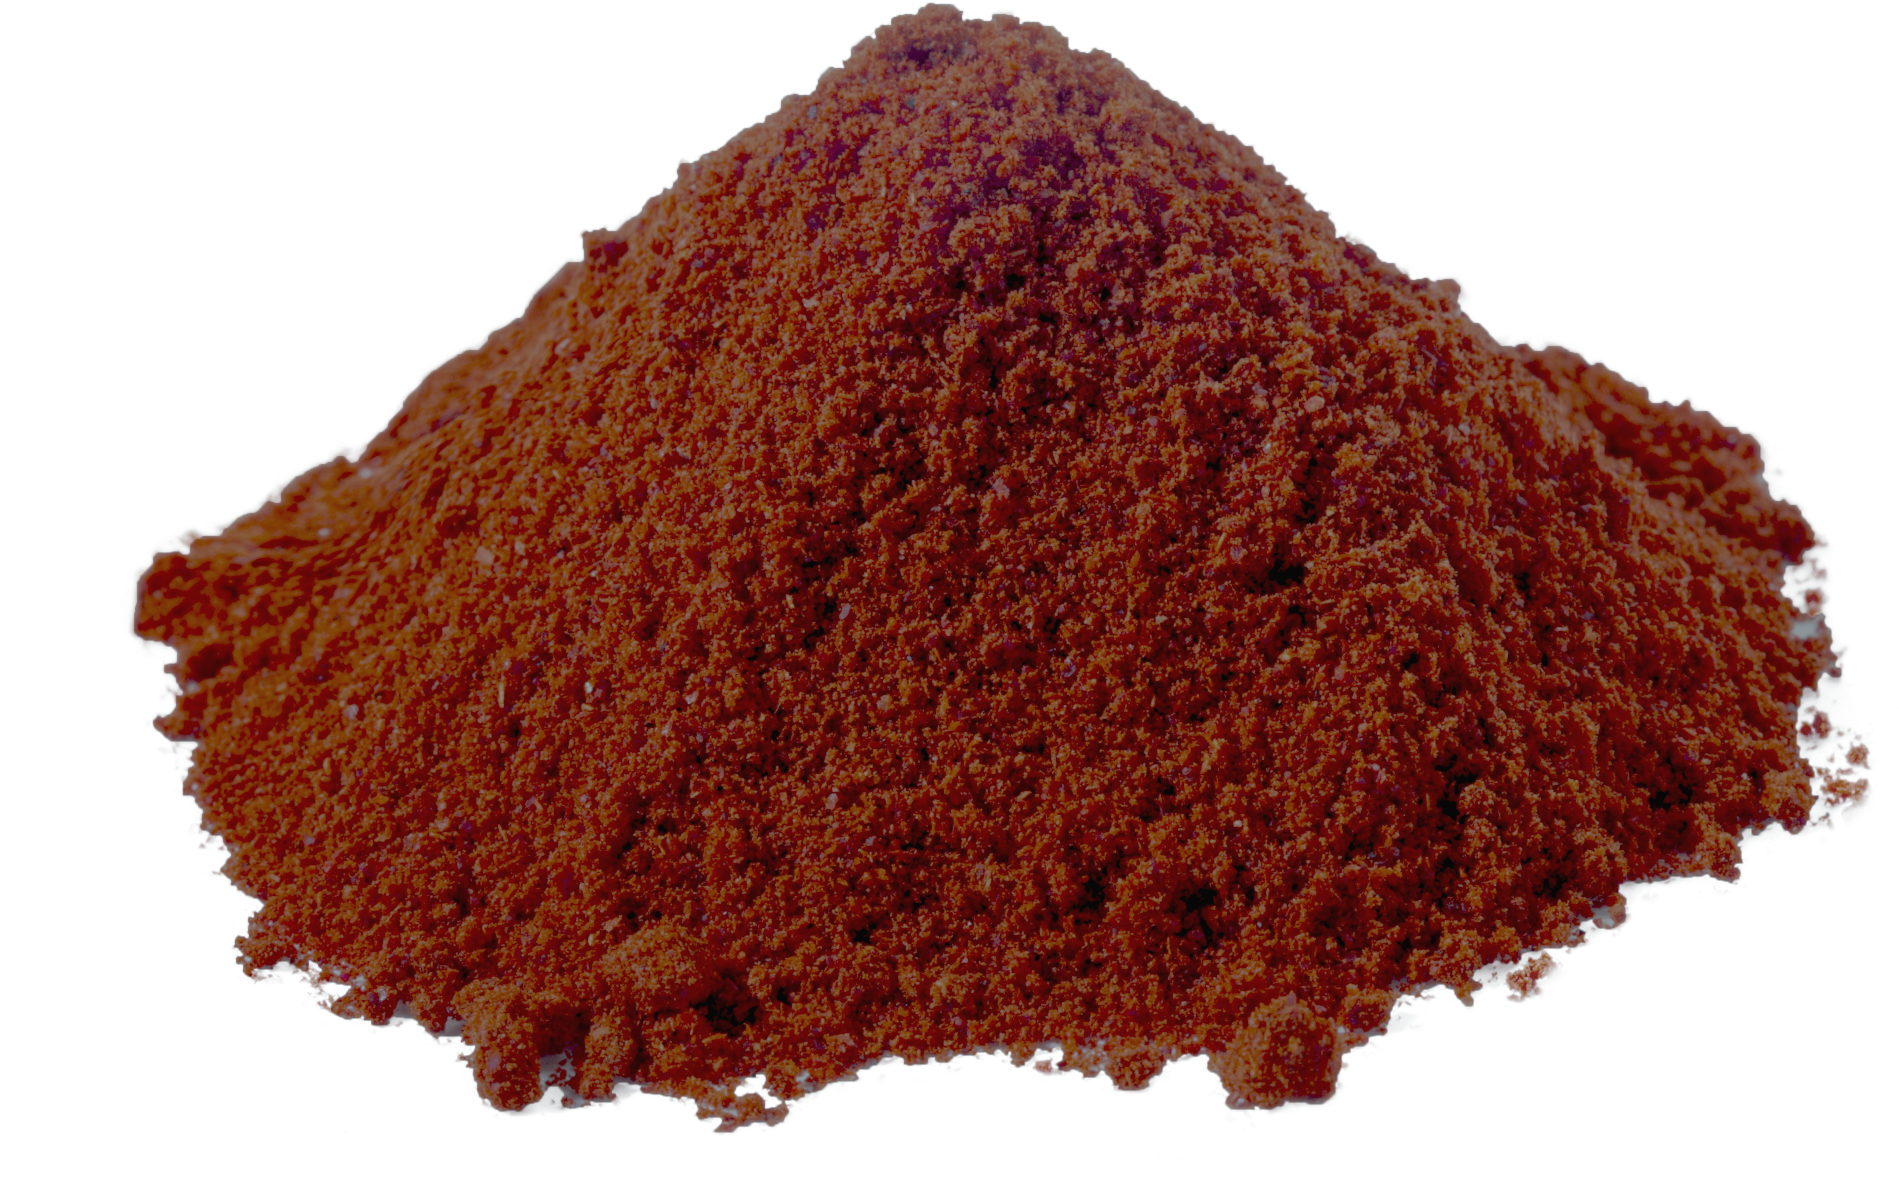 A Pile Of Red Powder